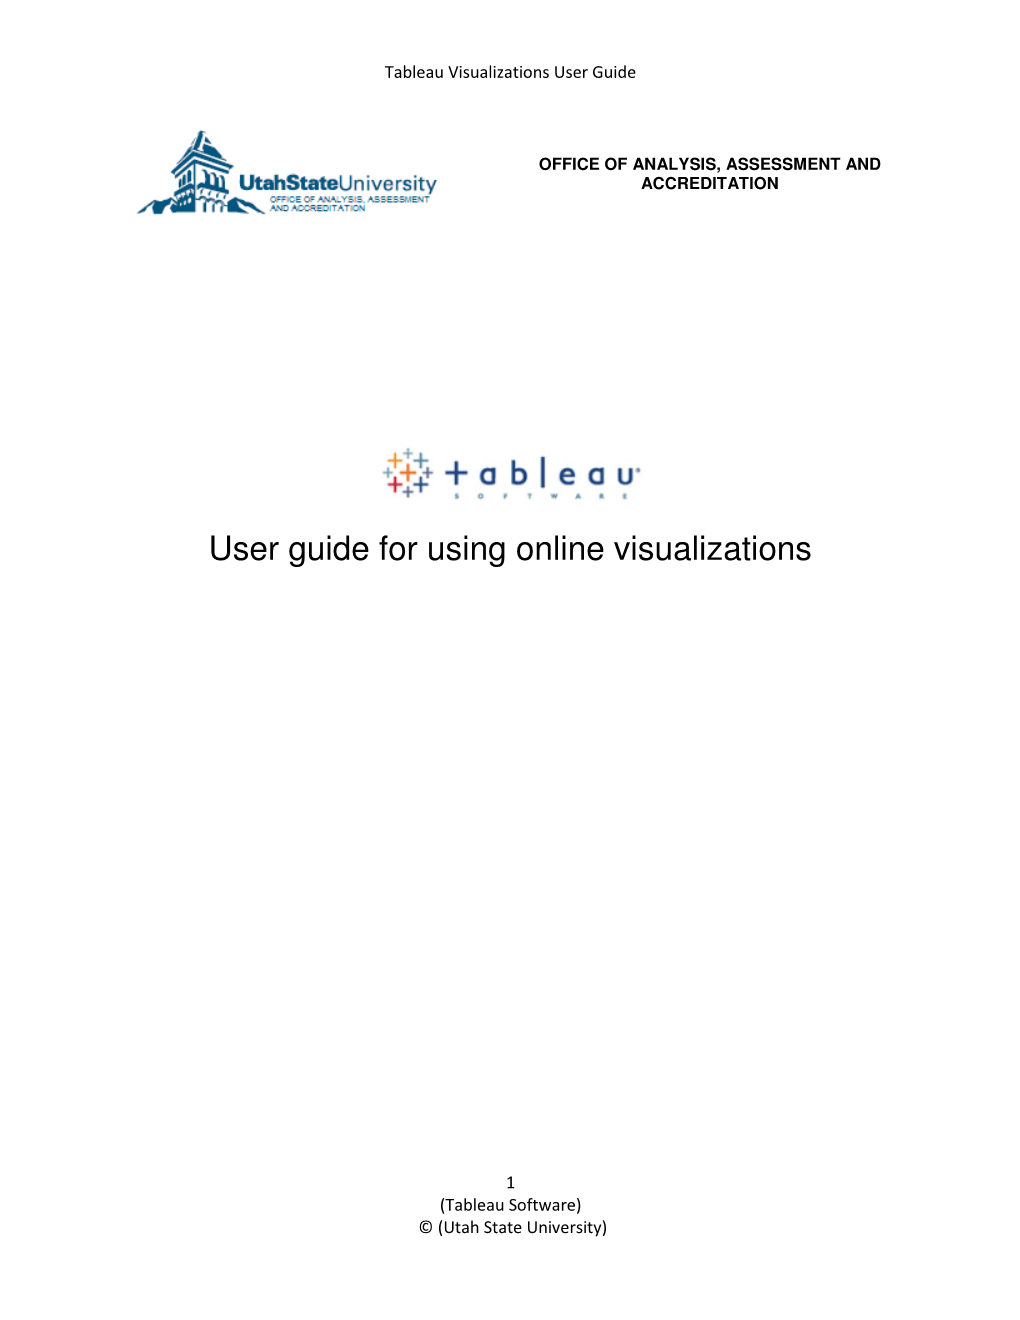 User Guide for Using Online Visualizations